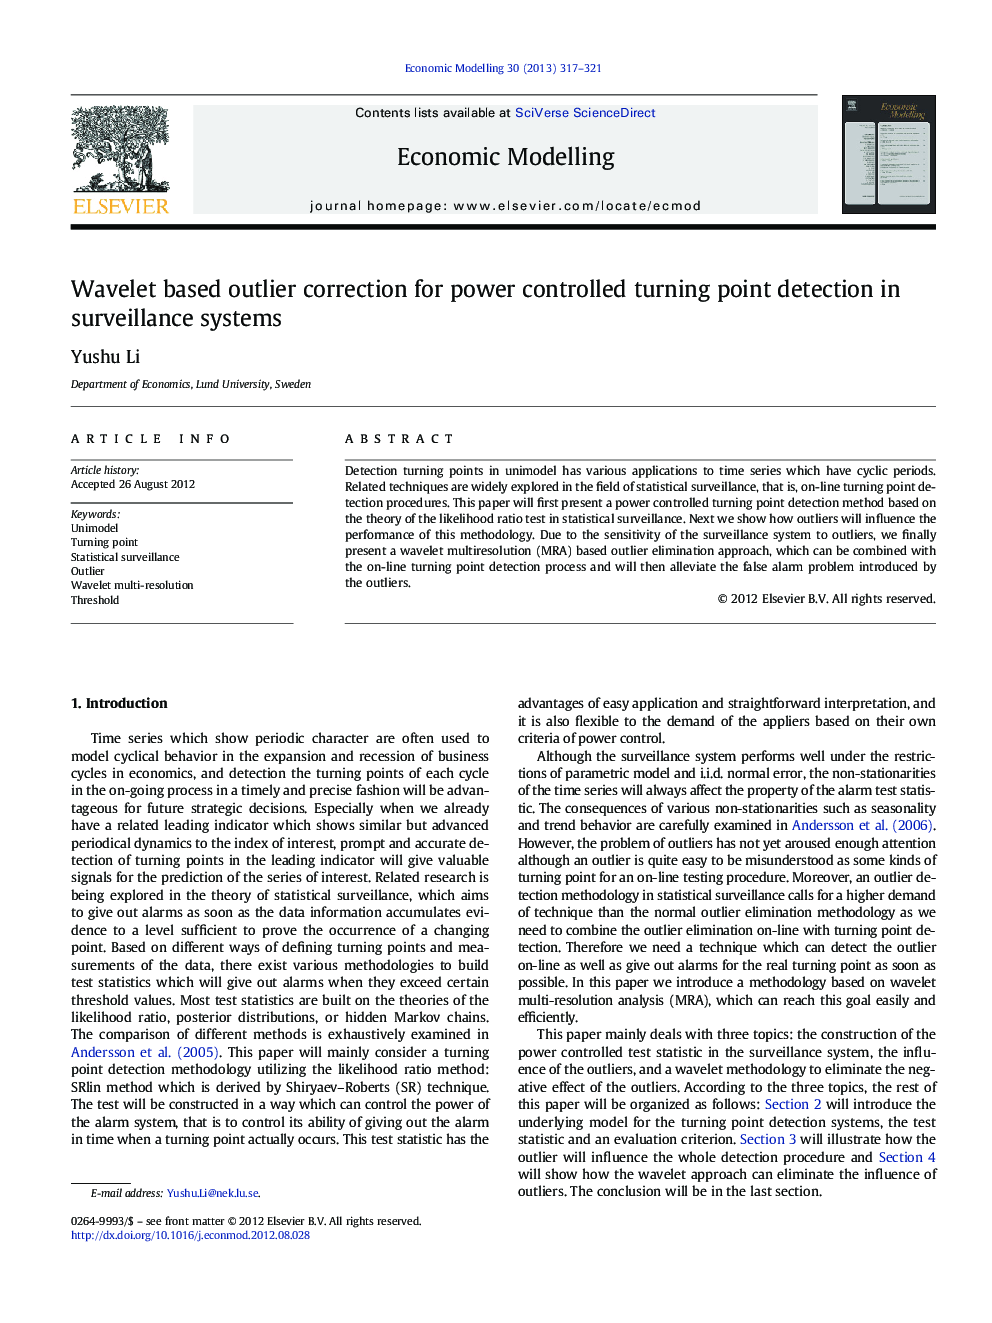 Wavelet based outlier correction for power controlled turning point detection in surveillance systems